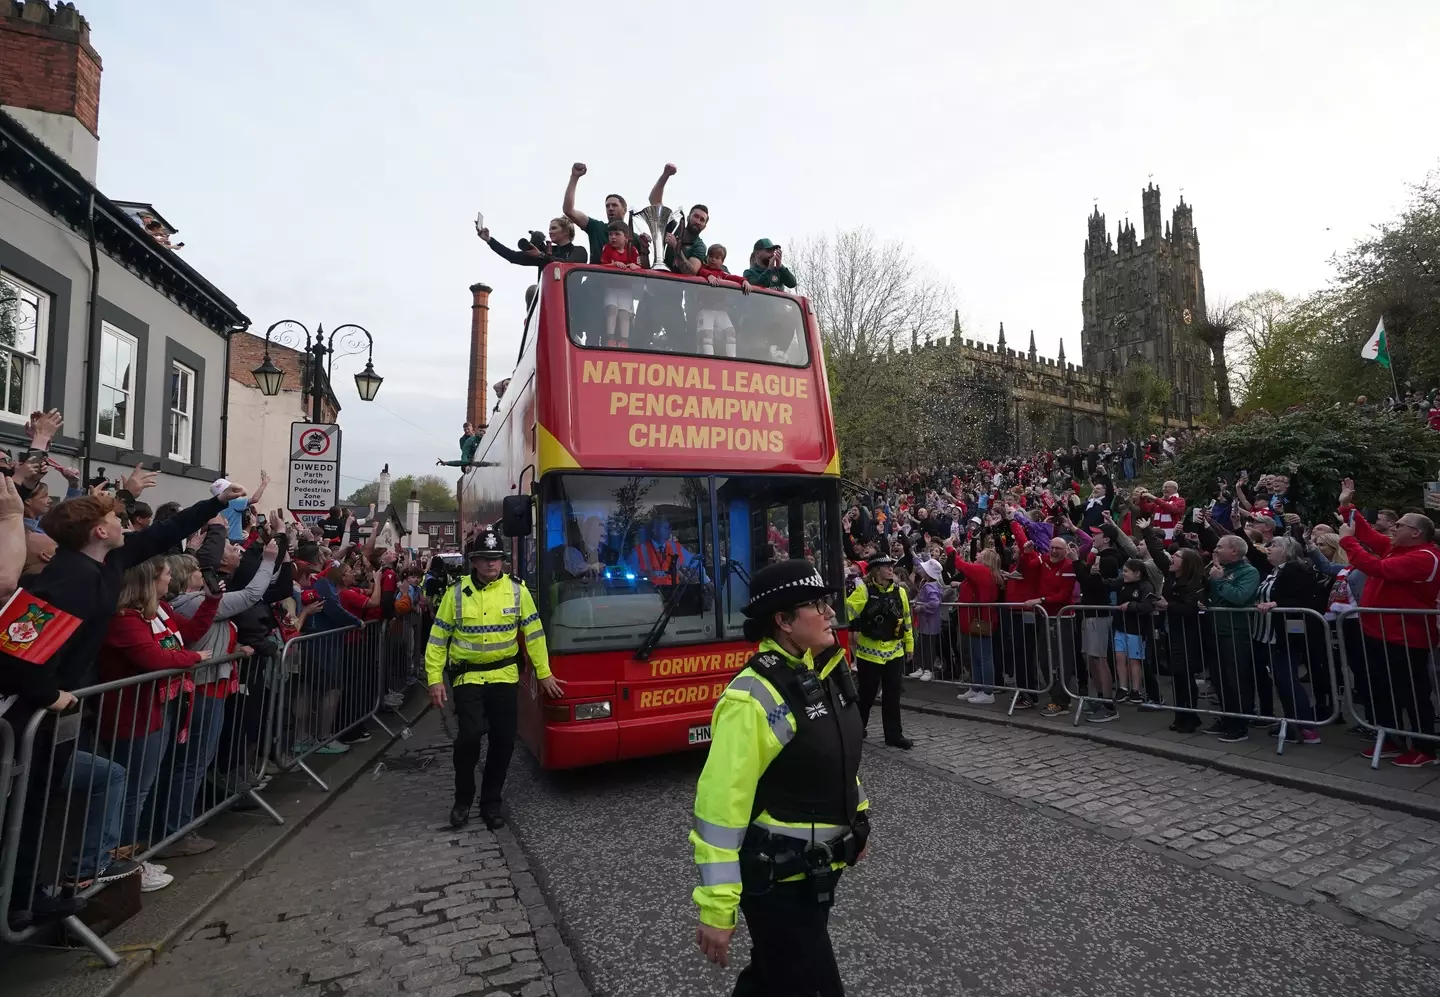 Wrexham took to the streets for their open-top bus parade last night.